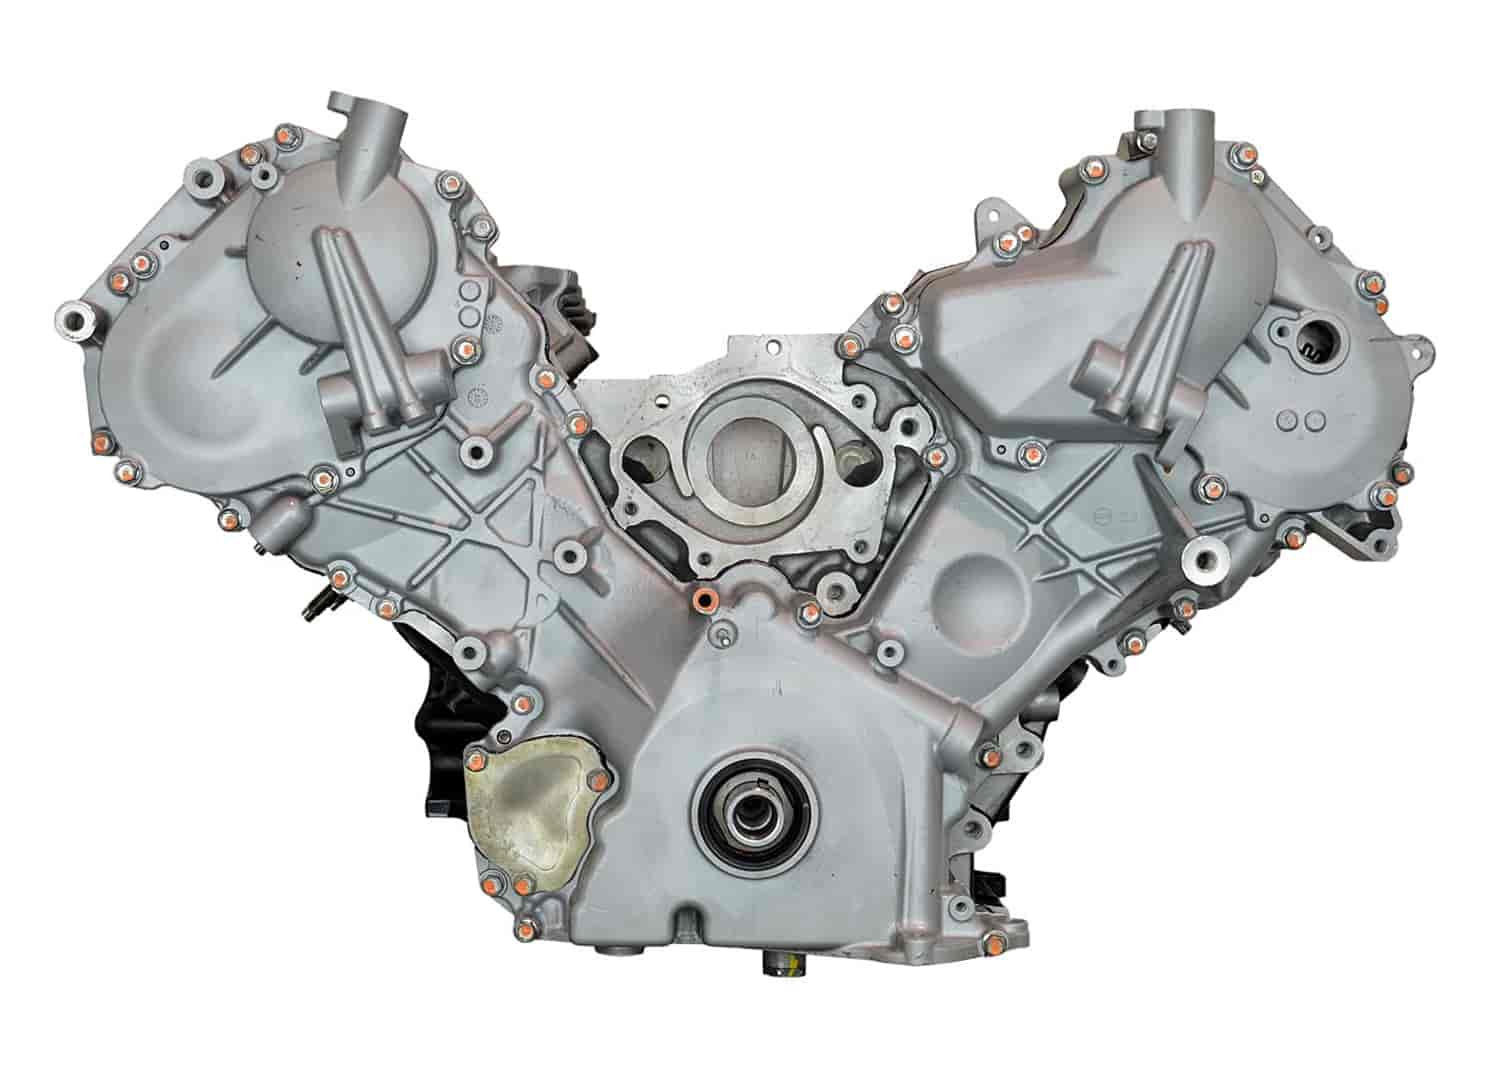 Remanufactured Crate Engine for 2007-2010 Nissan & Infinity with 5.6L V8 VK56DE